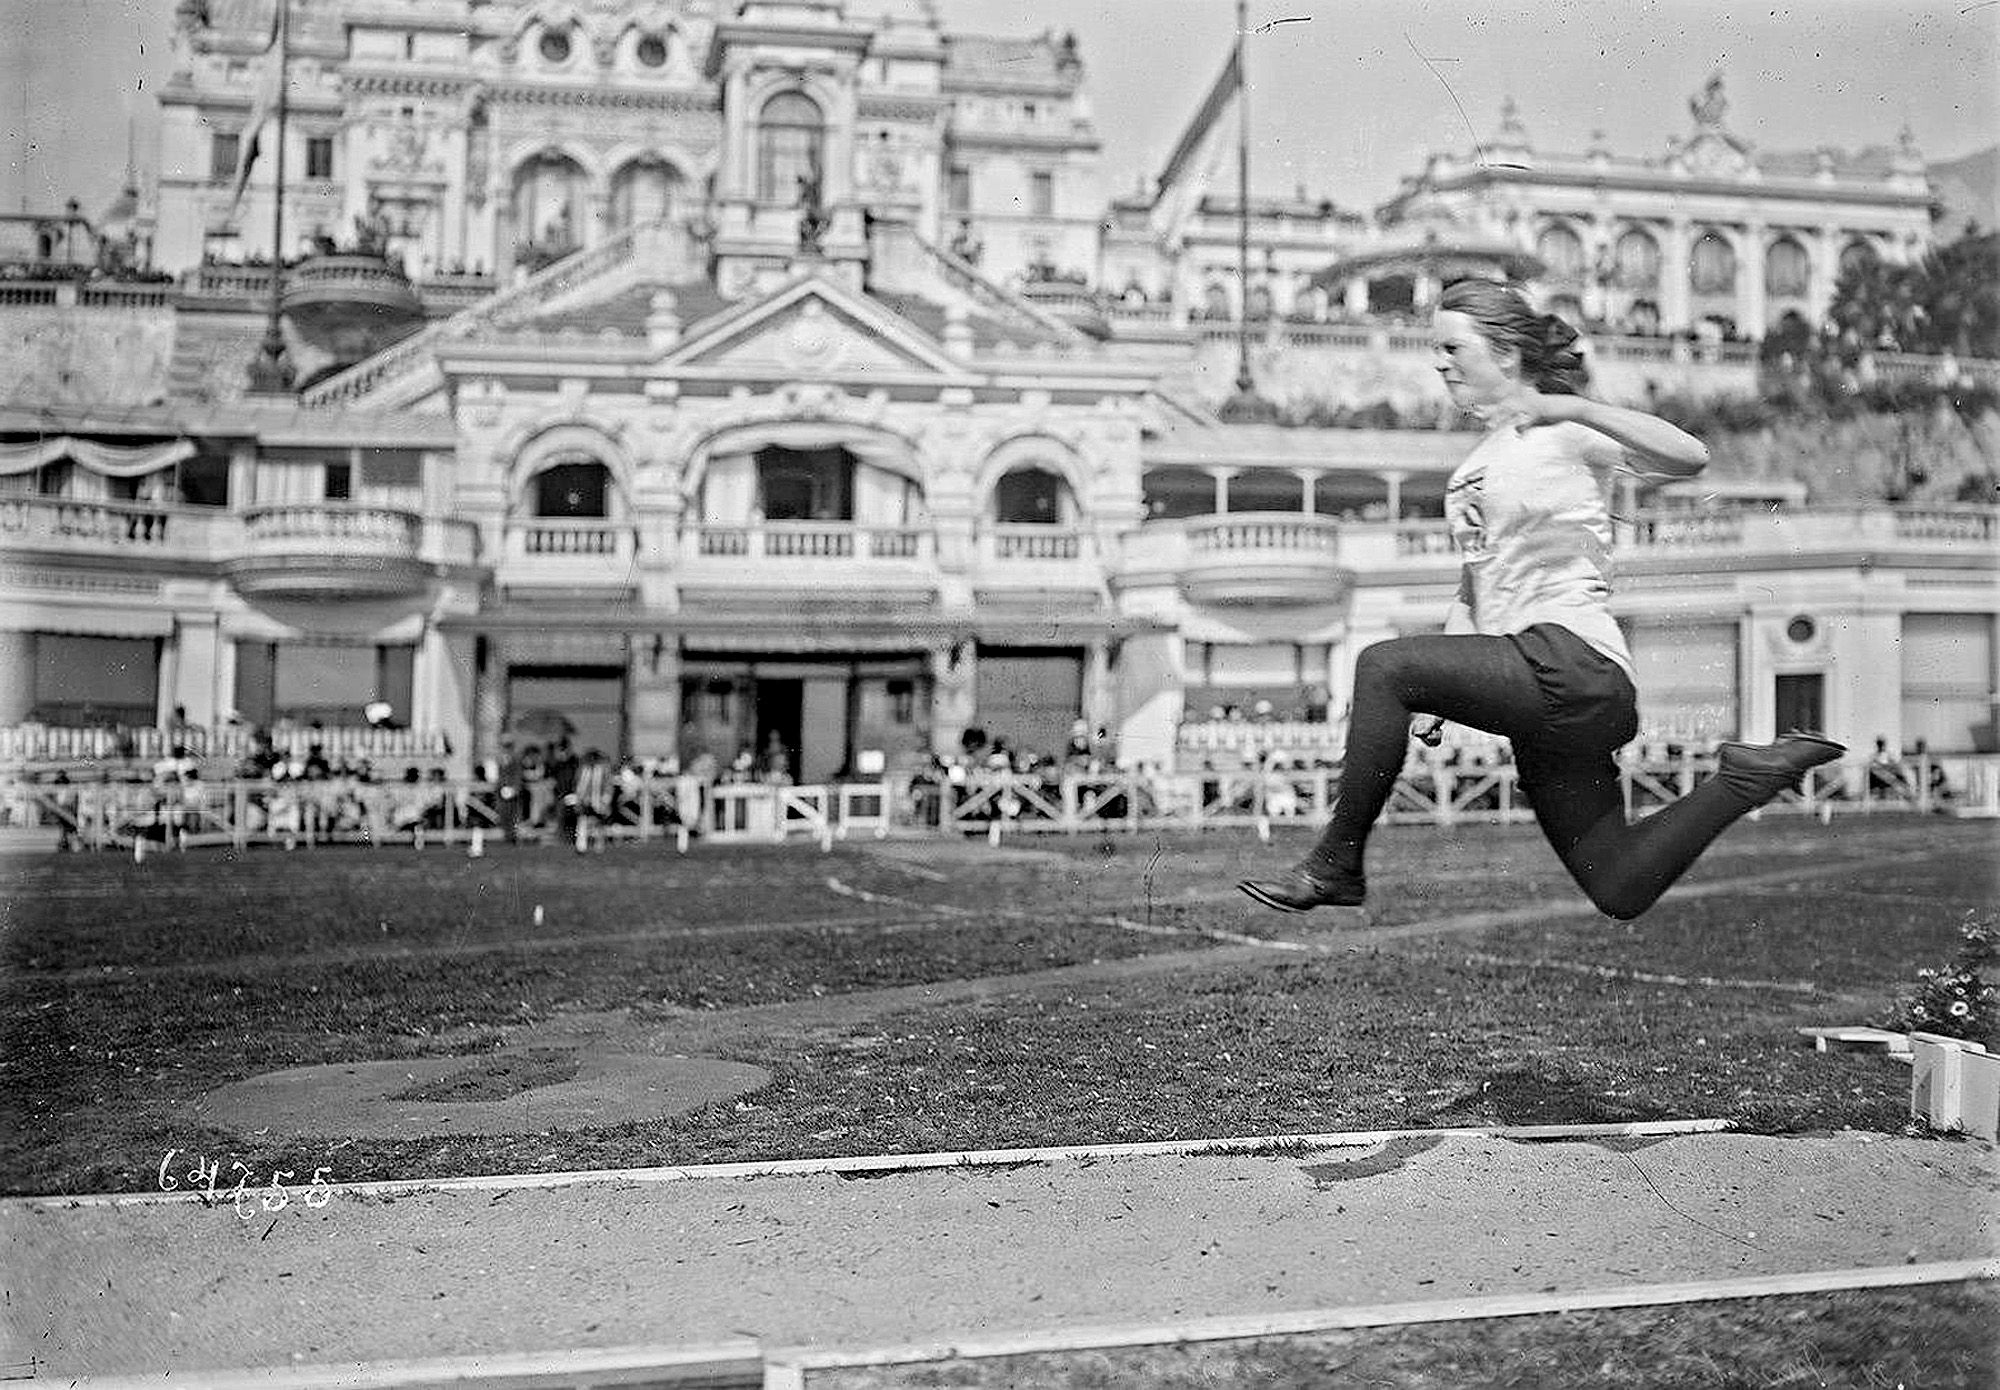 Five-time gold medallist Mary Lines in action at the 1921 Women's Olympiad in Monaco